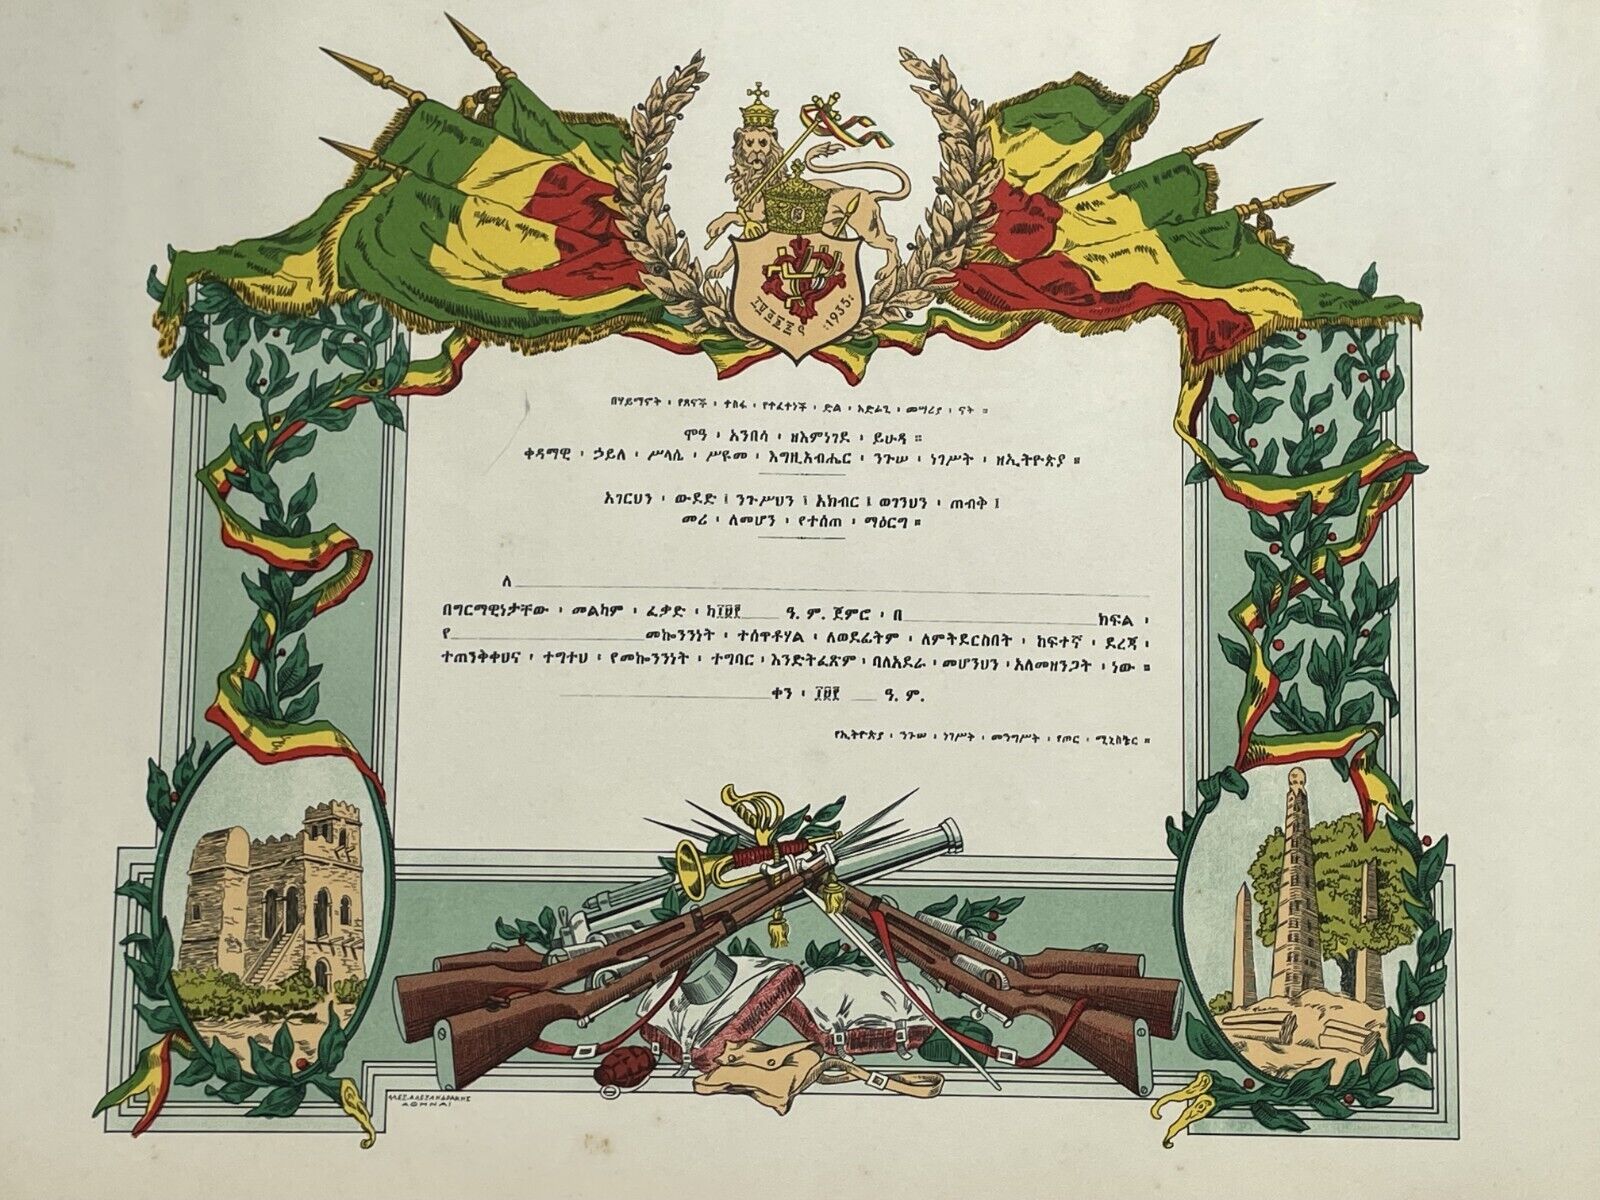 Ethiopia Haile Selassie military academy Officers Graduation Certificate. 1935